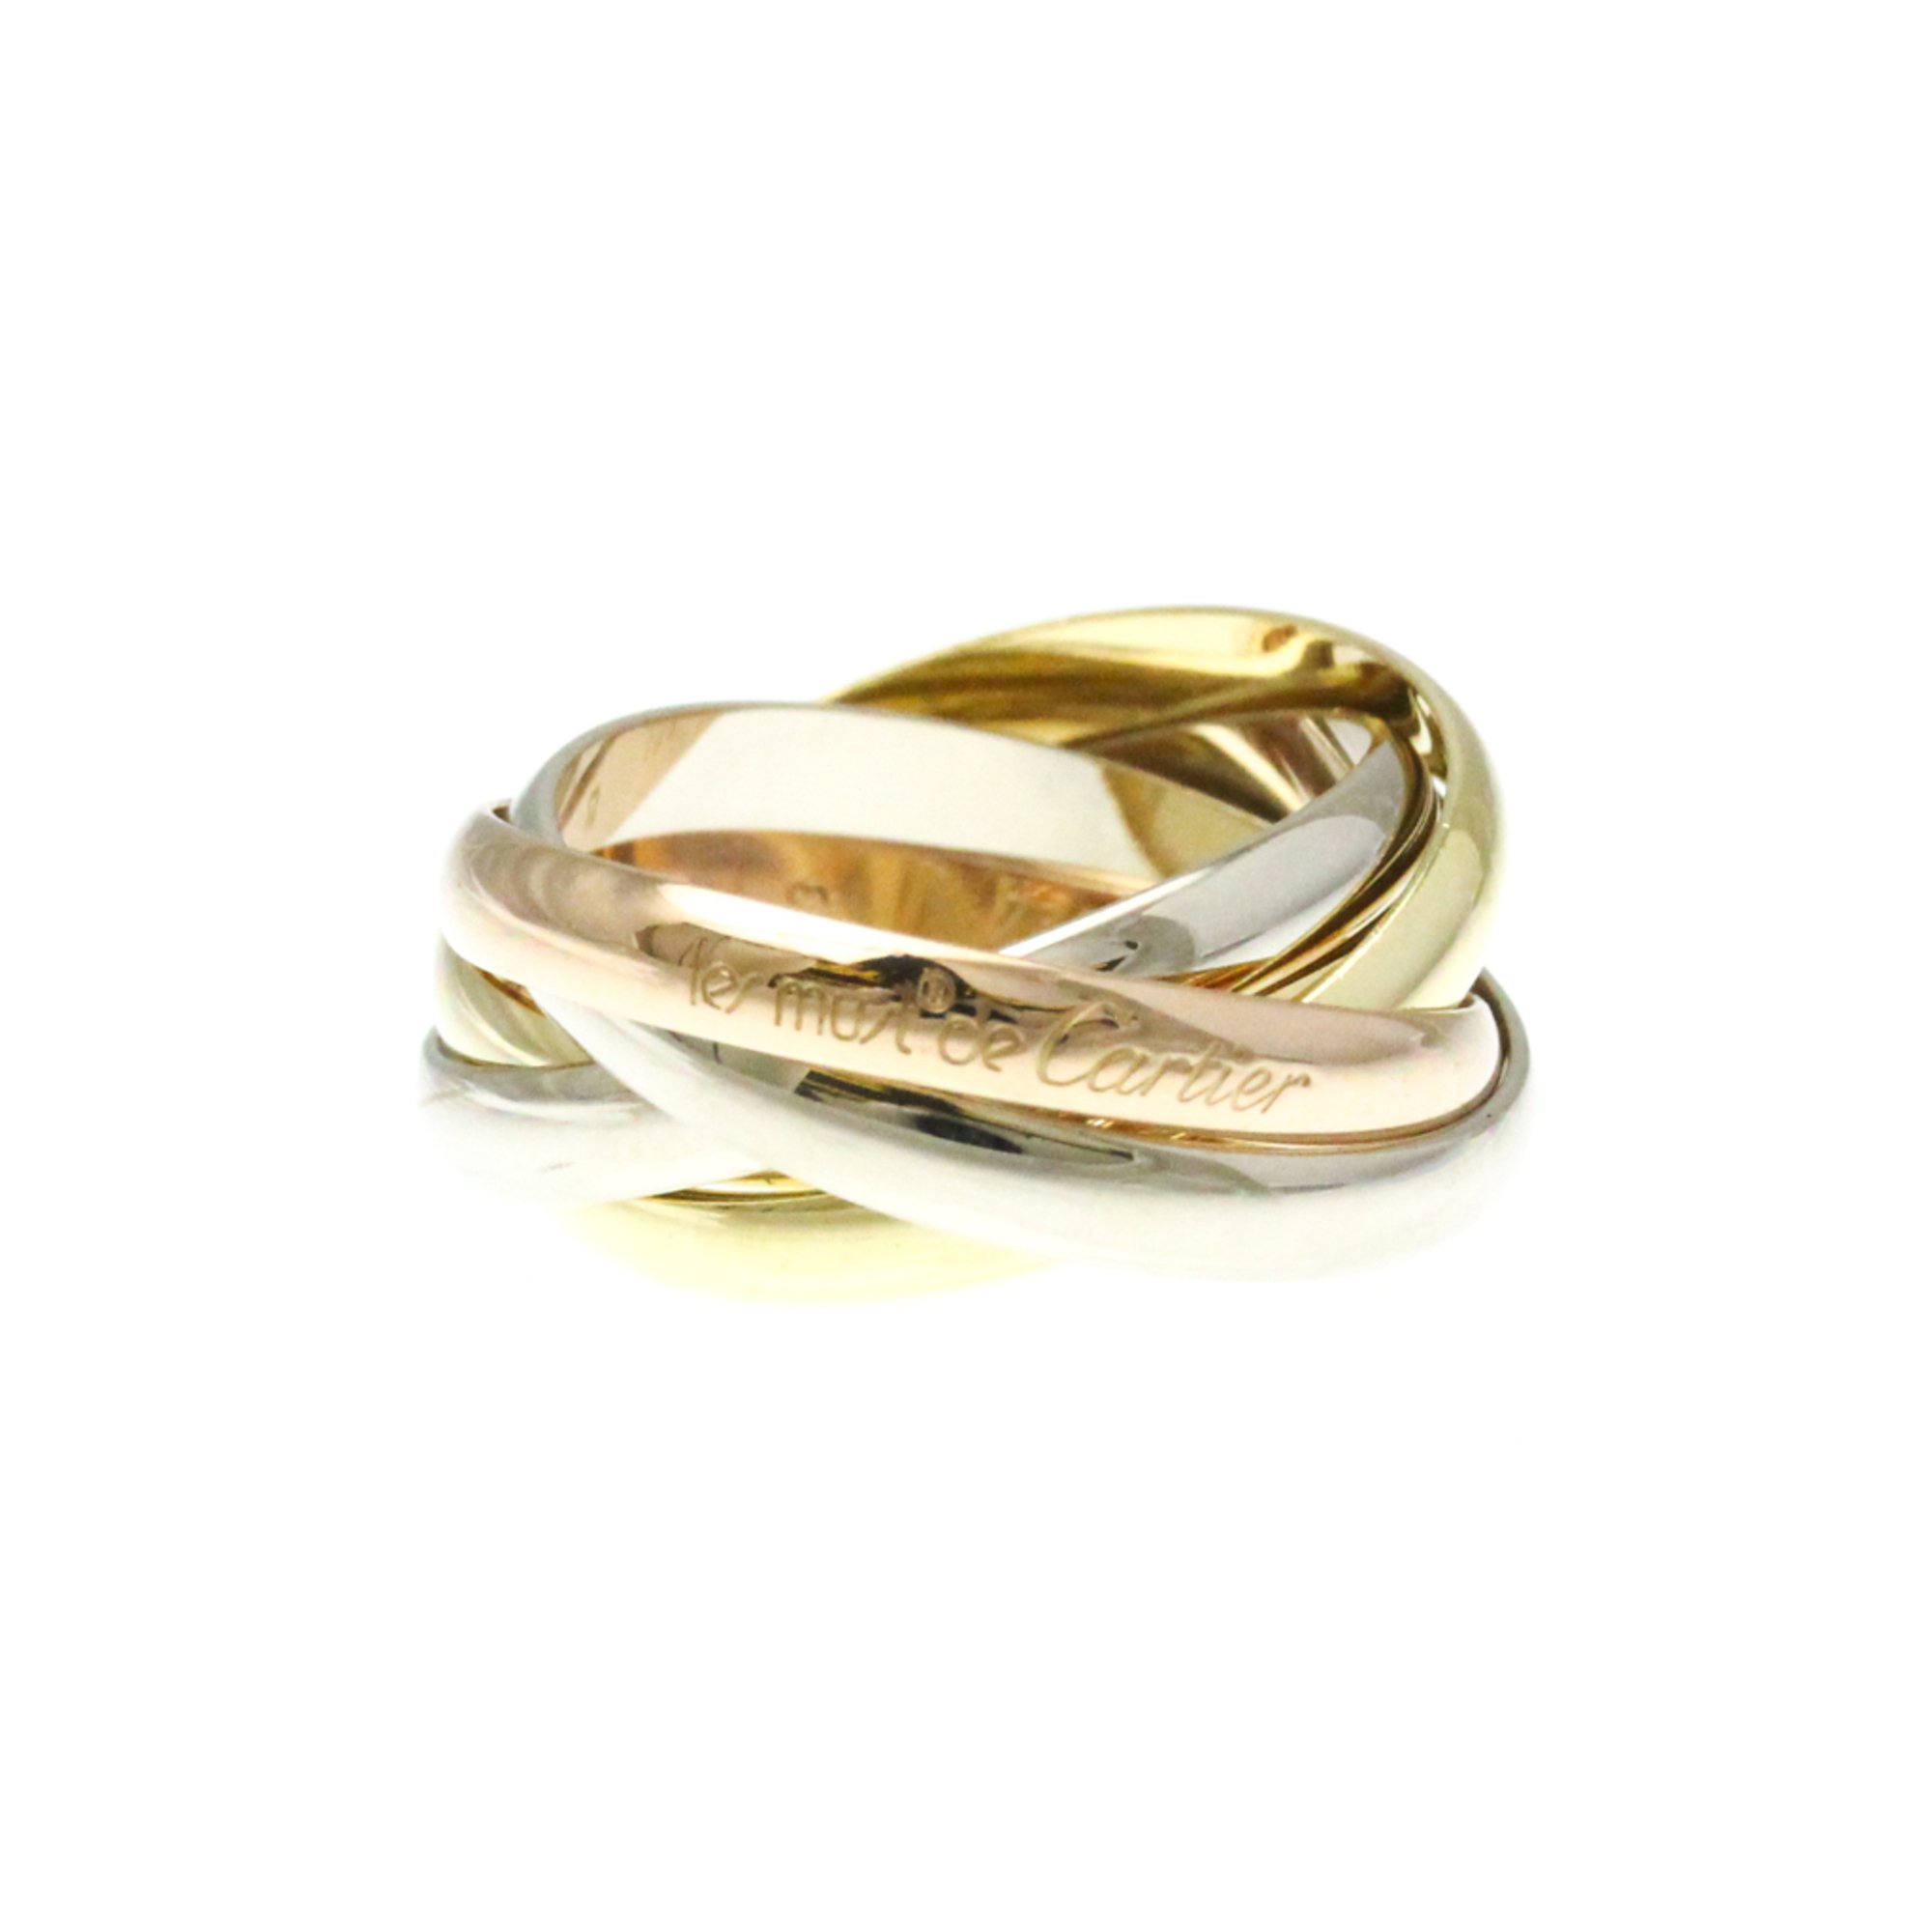 Cartier Trinity Ring 5 Rows Pink Gold (18K),White Gold (18K),Yellow Gold (18K) Fashion No Stone Band Ring Gold